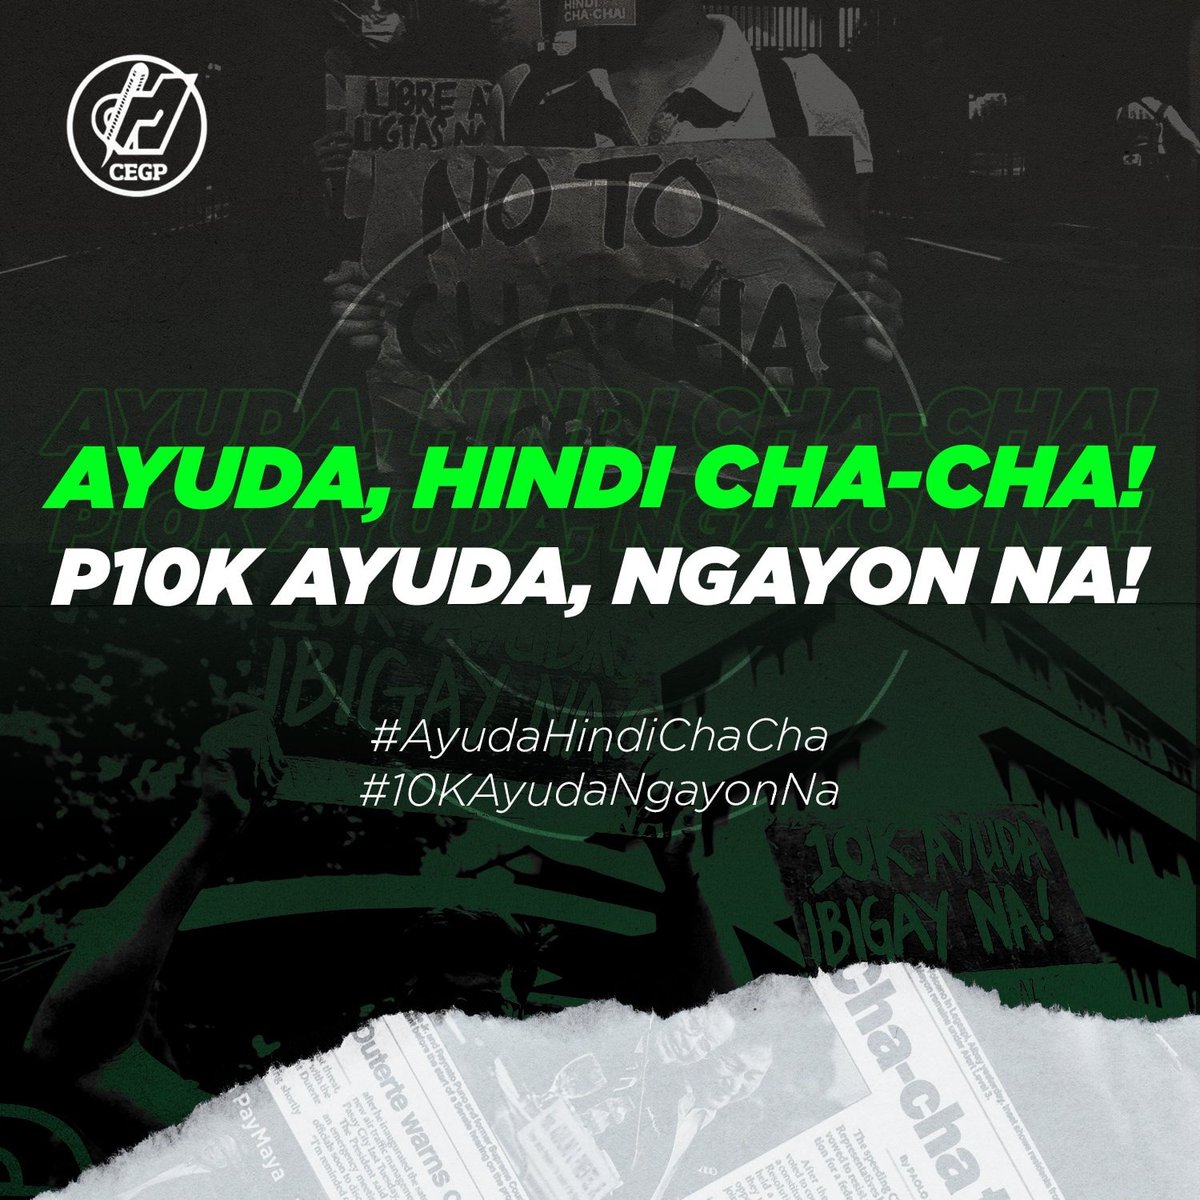 At a time when every Filipino desperately needs all the aid after still being stuck in the longest lockdown in the world, the Duterte administration has decided to not certify Bayanihan 3 as urgent.

Read more: facebook.com/CEGPNationalOf…

#10KAyudaNgayonNa 
#AyudaHindiChaCha